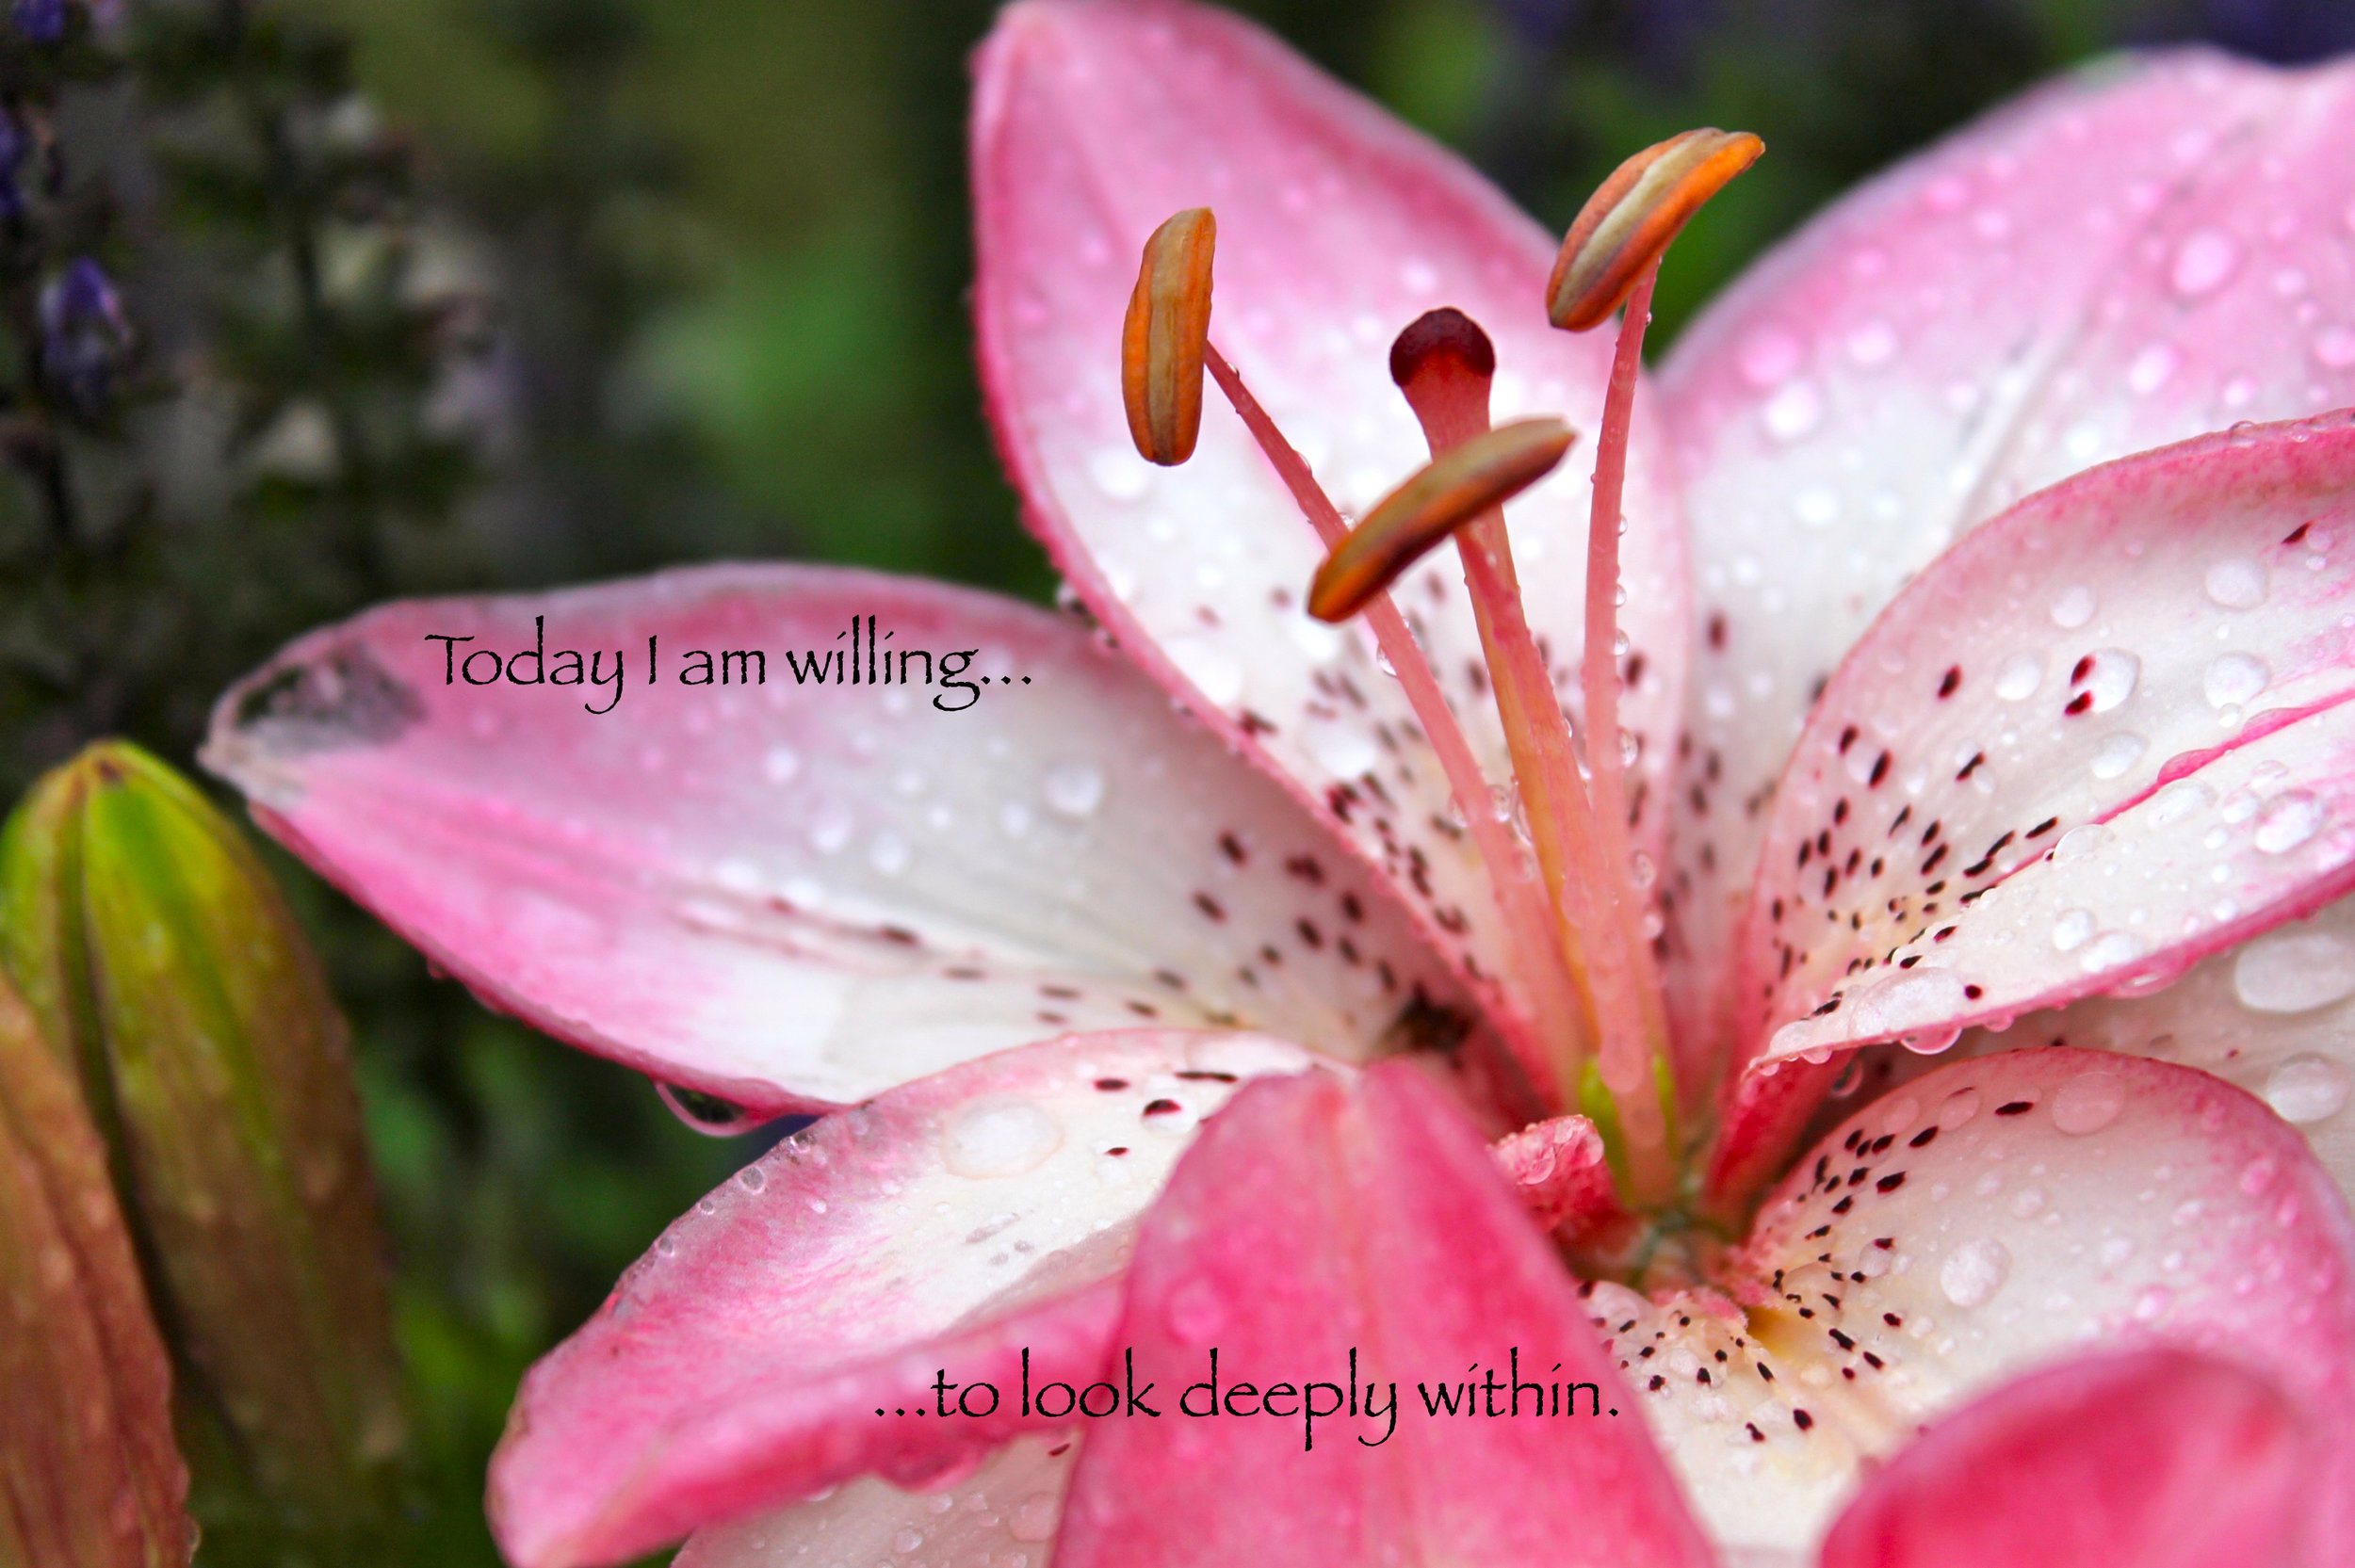 Tiger Lily_deeply within.jpg